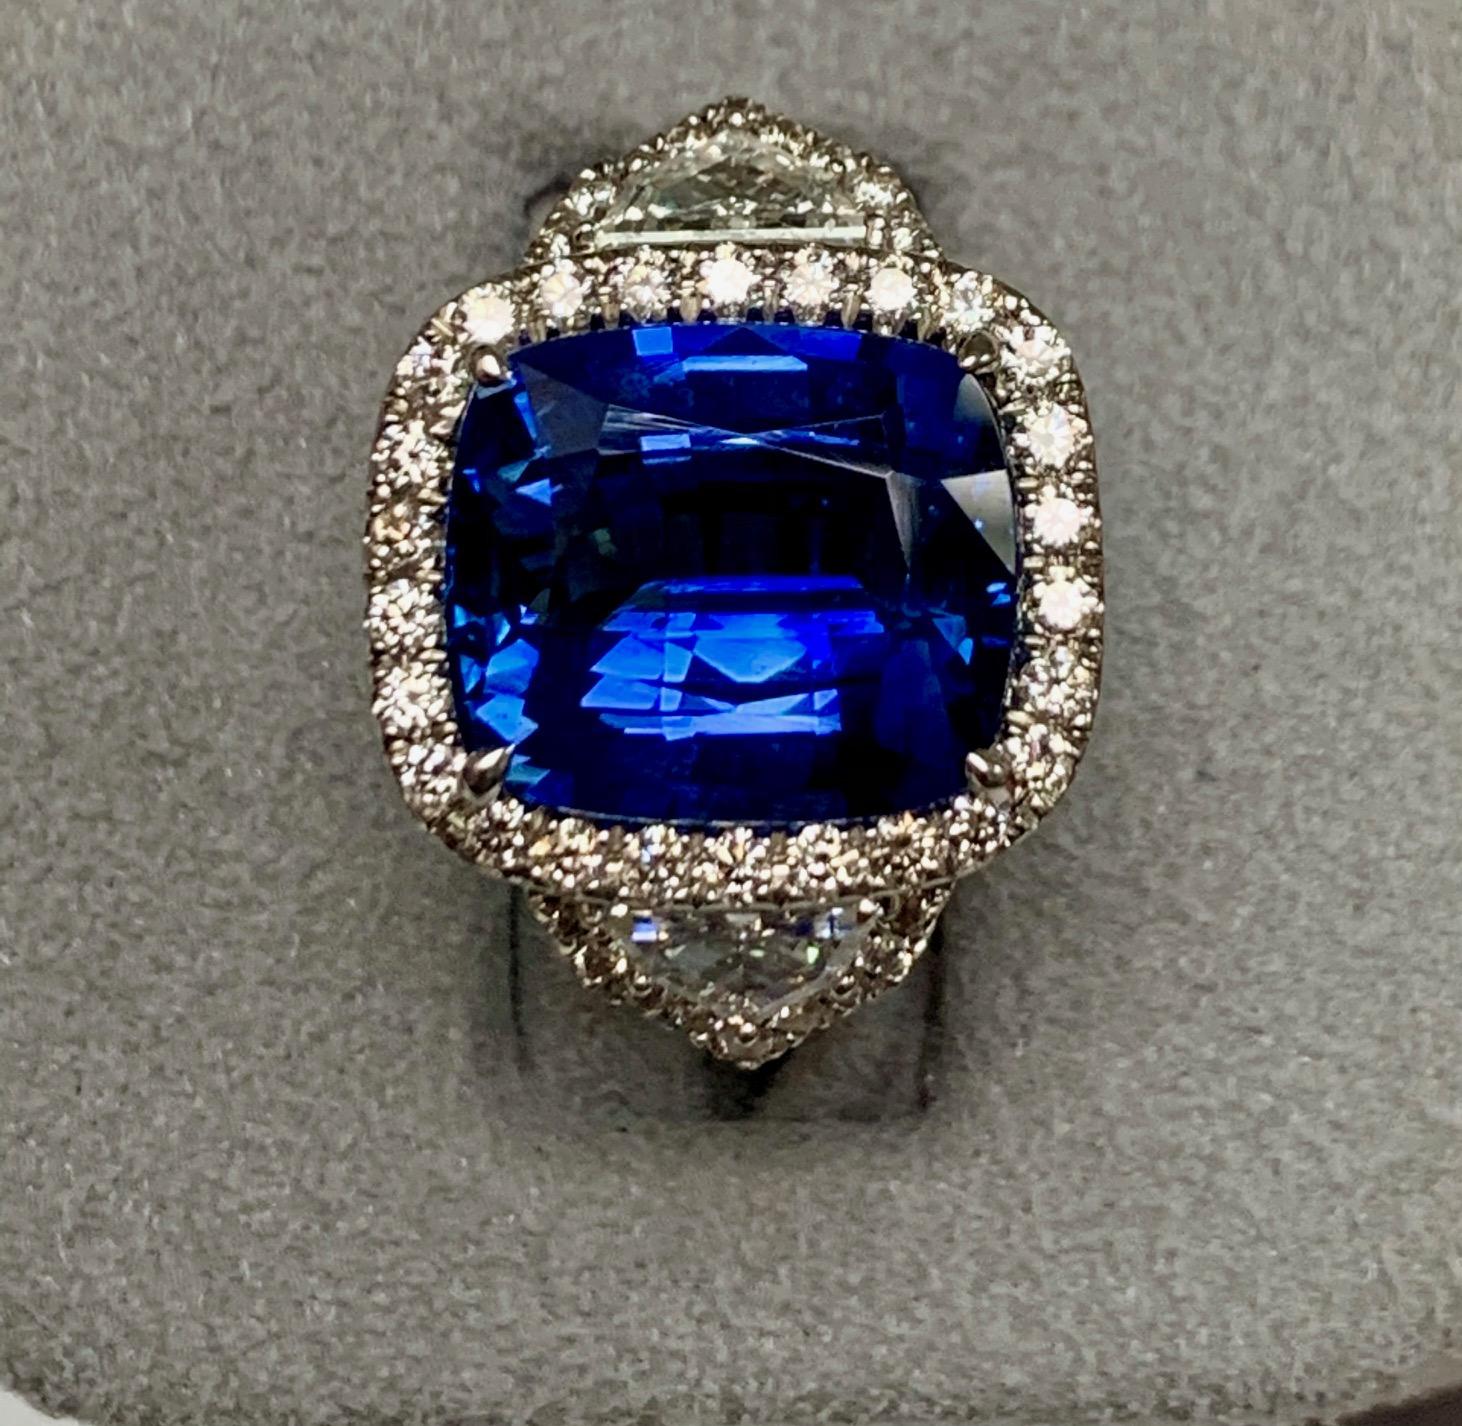 8.42 Carat Cushion sapphire set in 18k white gold surronded with 0.70 ct round G-h color diamonds , vs1-si1 quality and 0.54 carat Epaulette cut white diamonds on the sides .